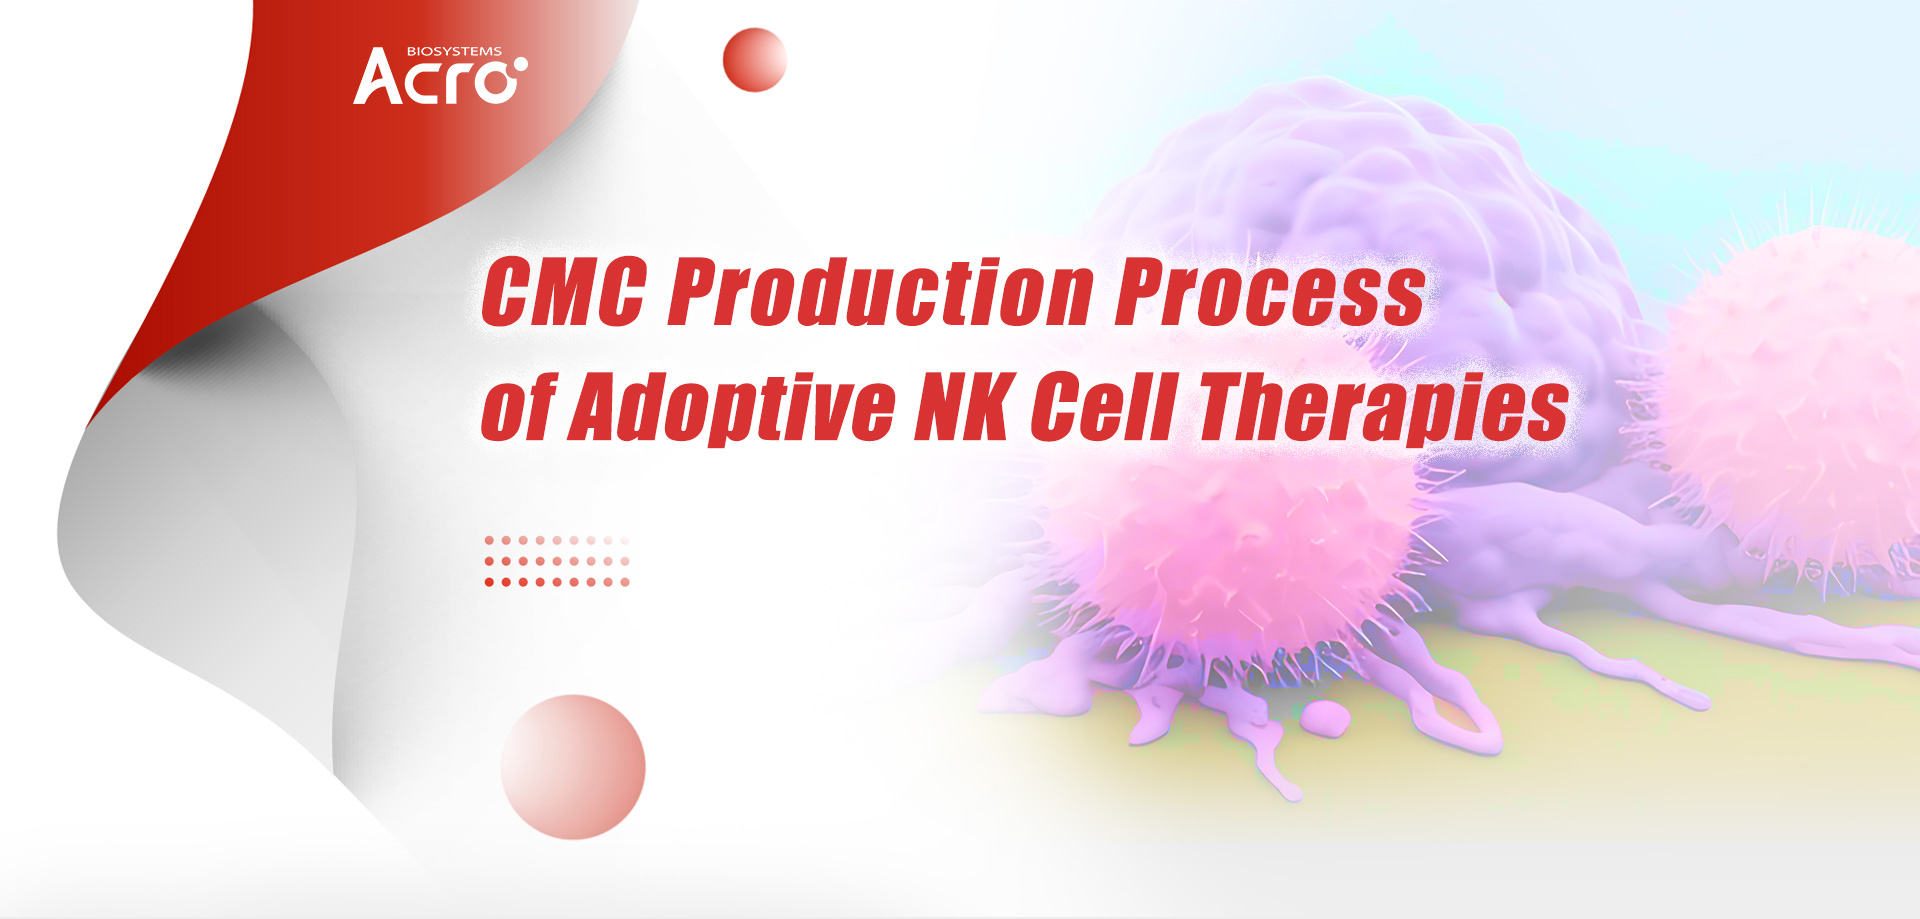 CMC Production Process of Adoptive NK Cell Therapies